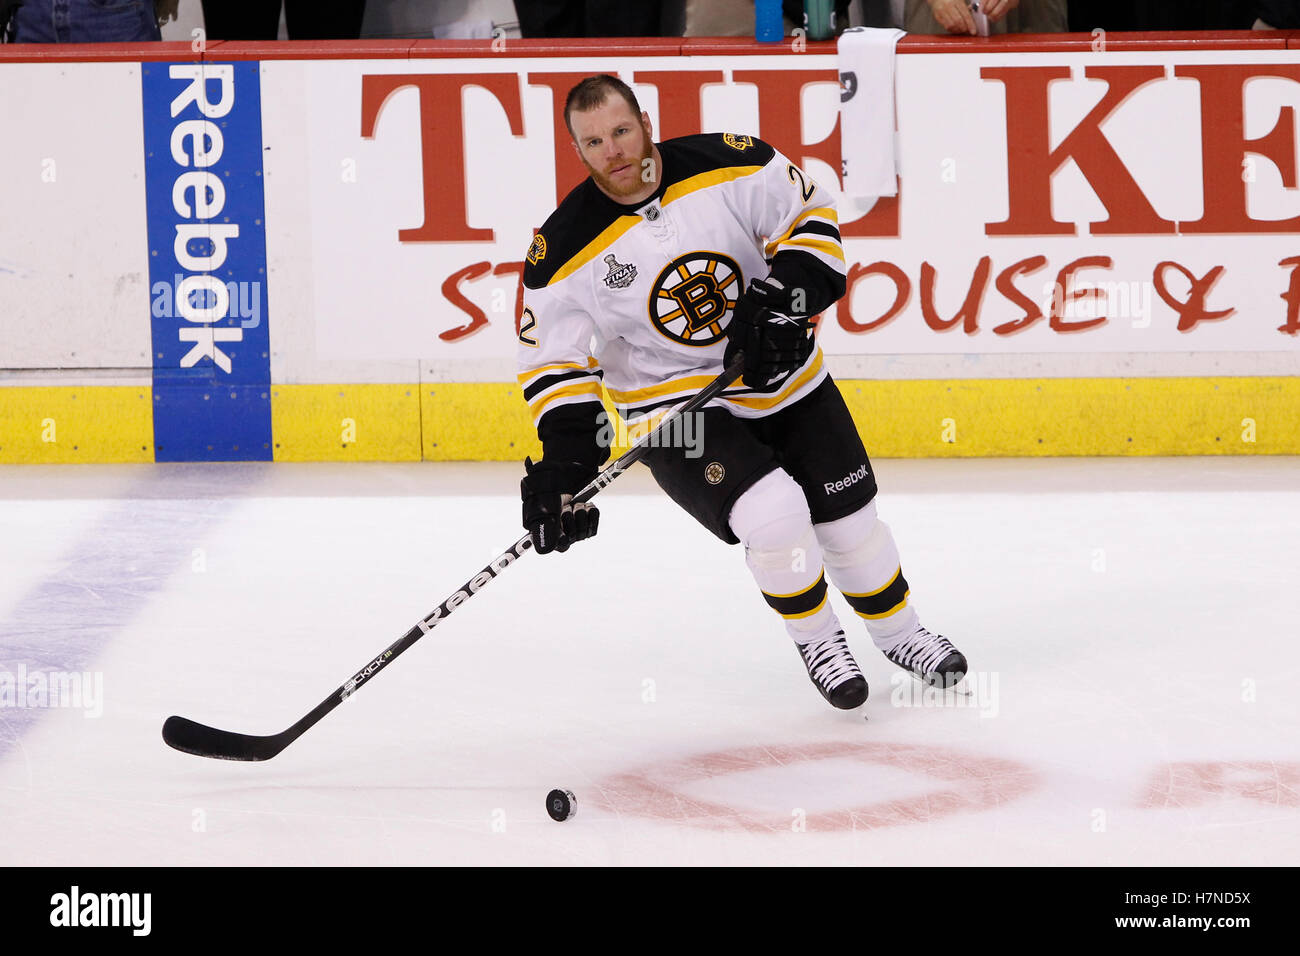 https://c8.alamy.com/comp/H7ND5X/june-10-2011-vancouver-bc-canada-boston-bruins-right-wing-shawn-thornton-H7ND5X.jpg